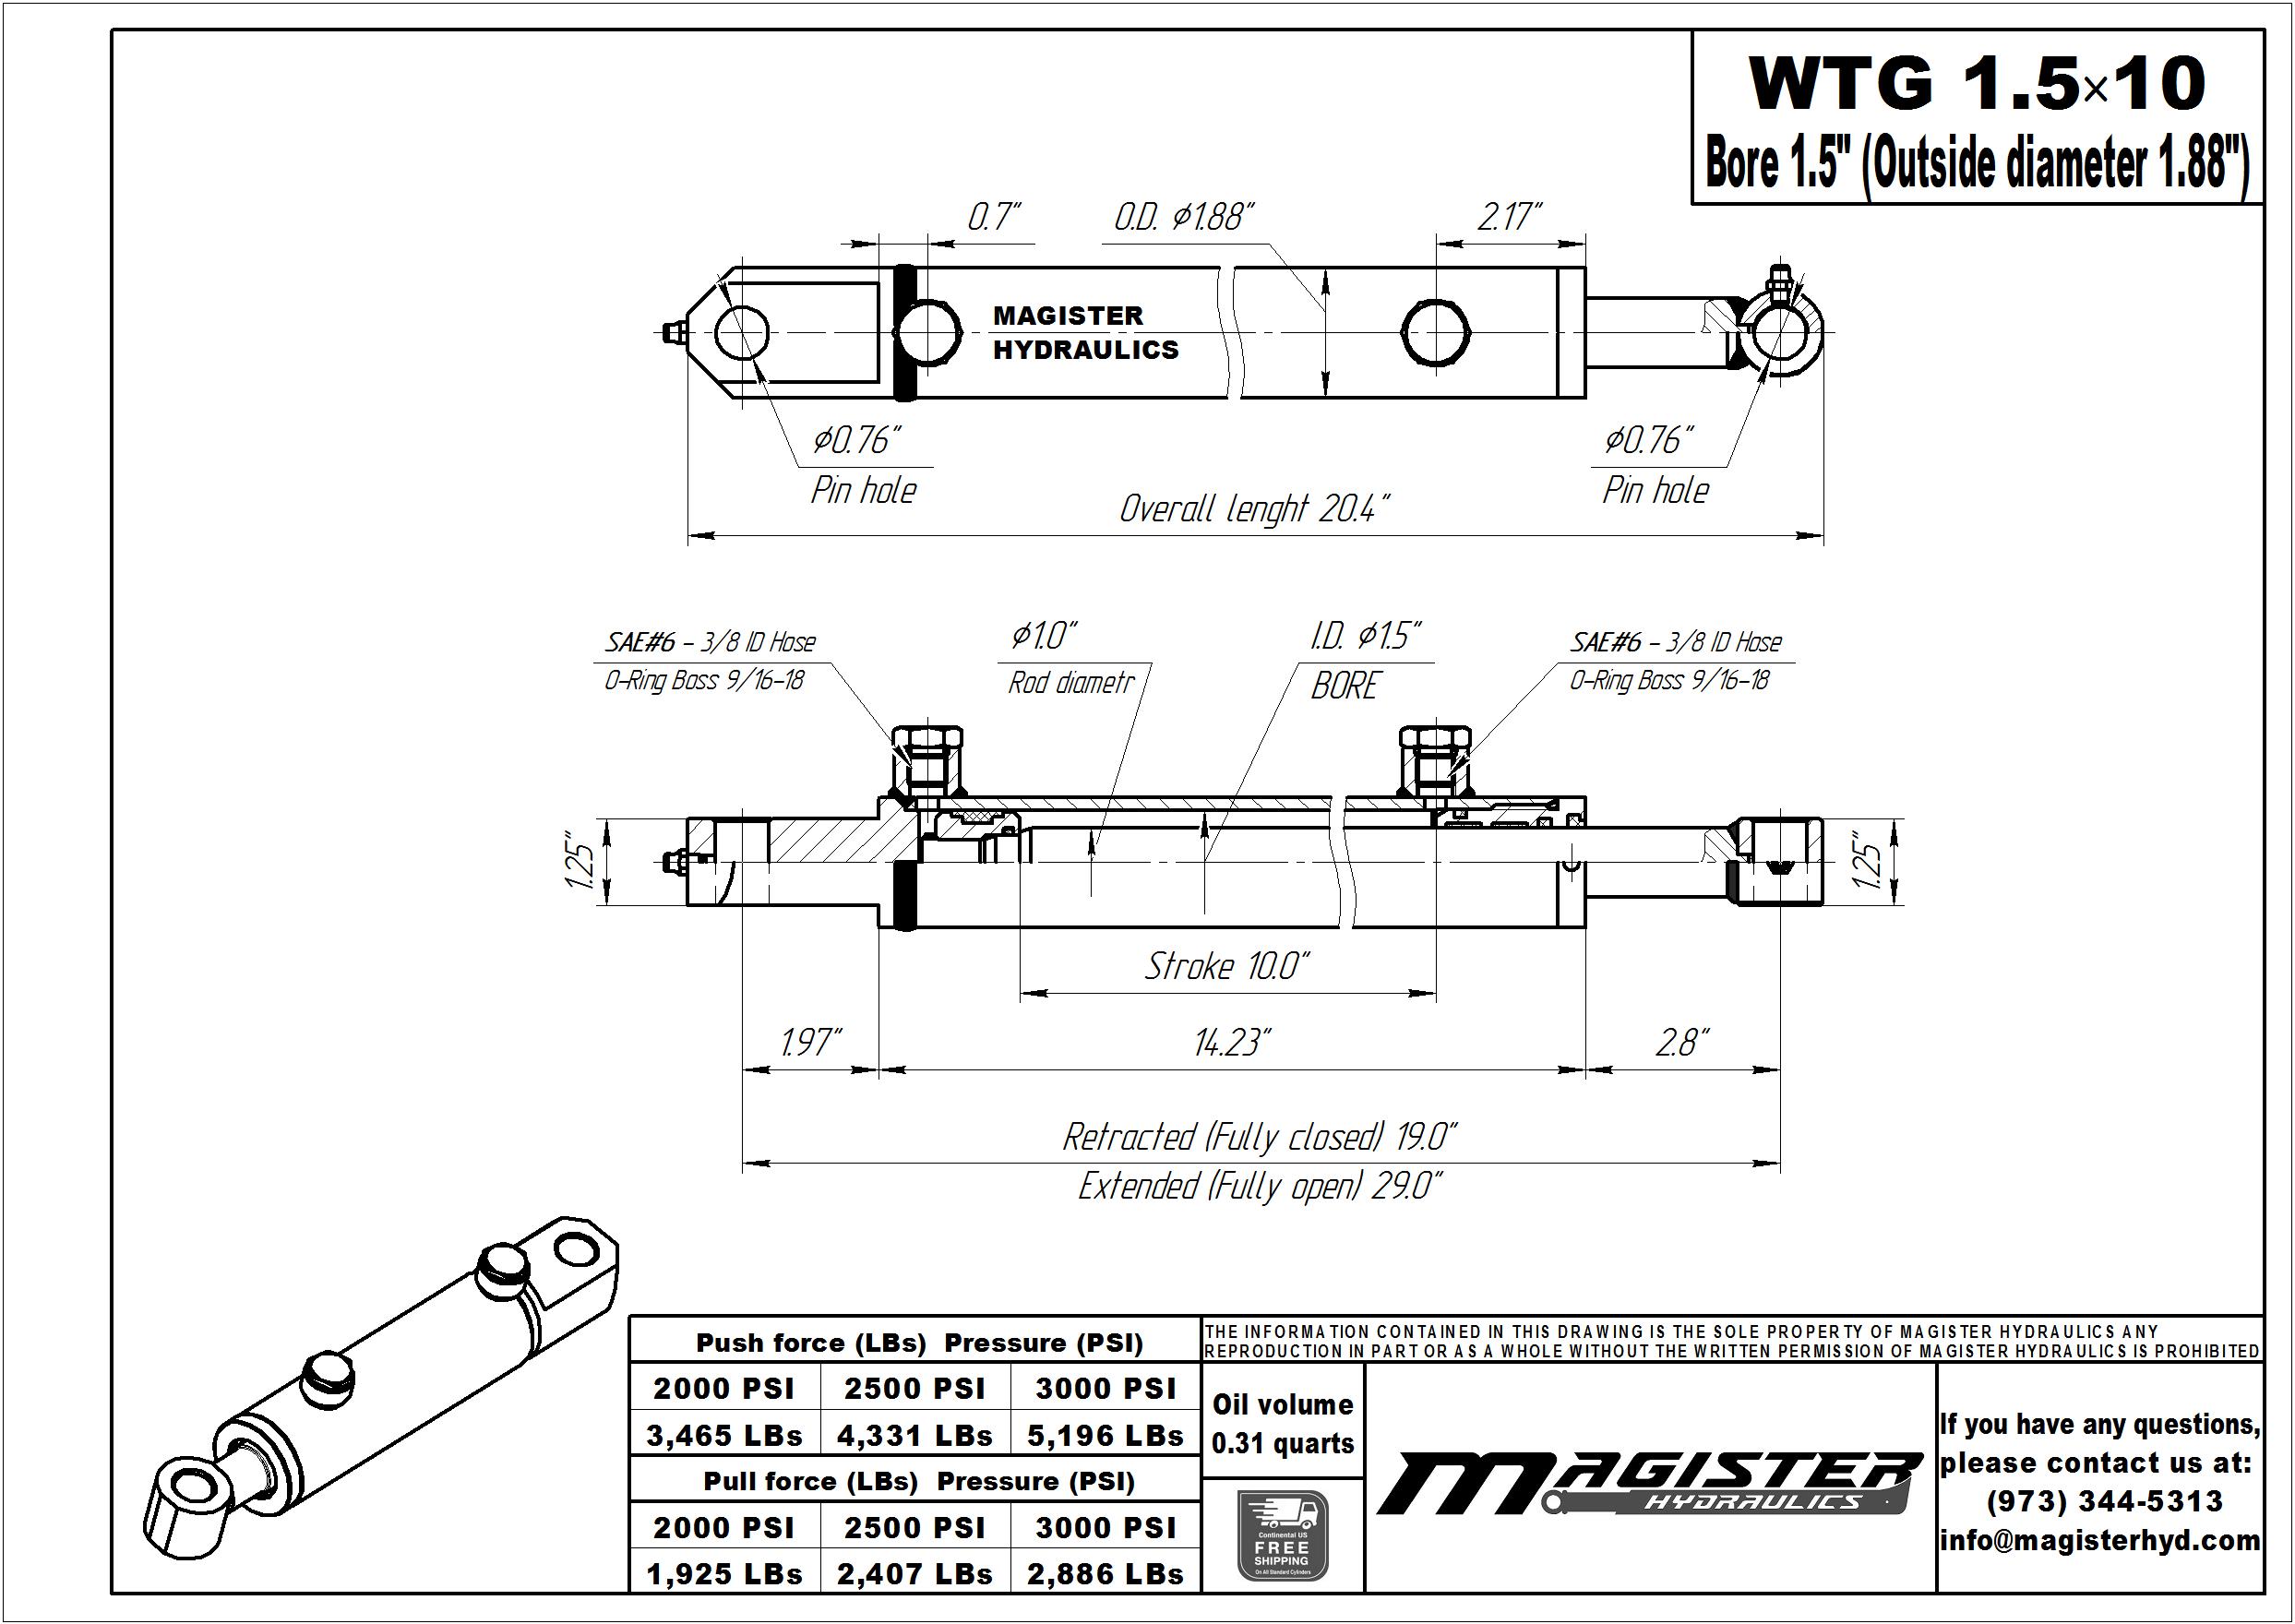 1.5 bore x 10 stroke hydraulic cylinder, welded tang double acting cylinder | Magister Hydraulics